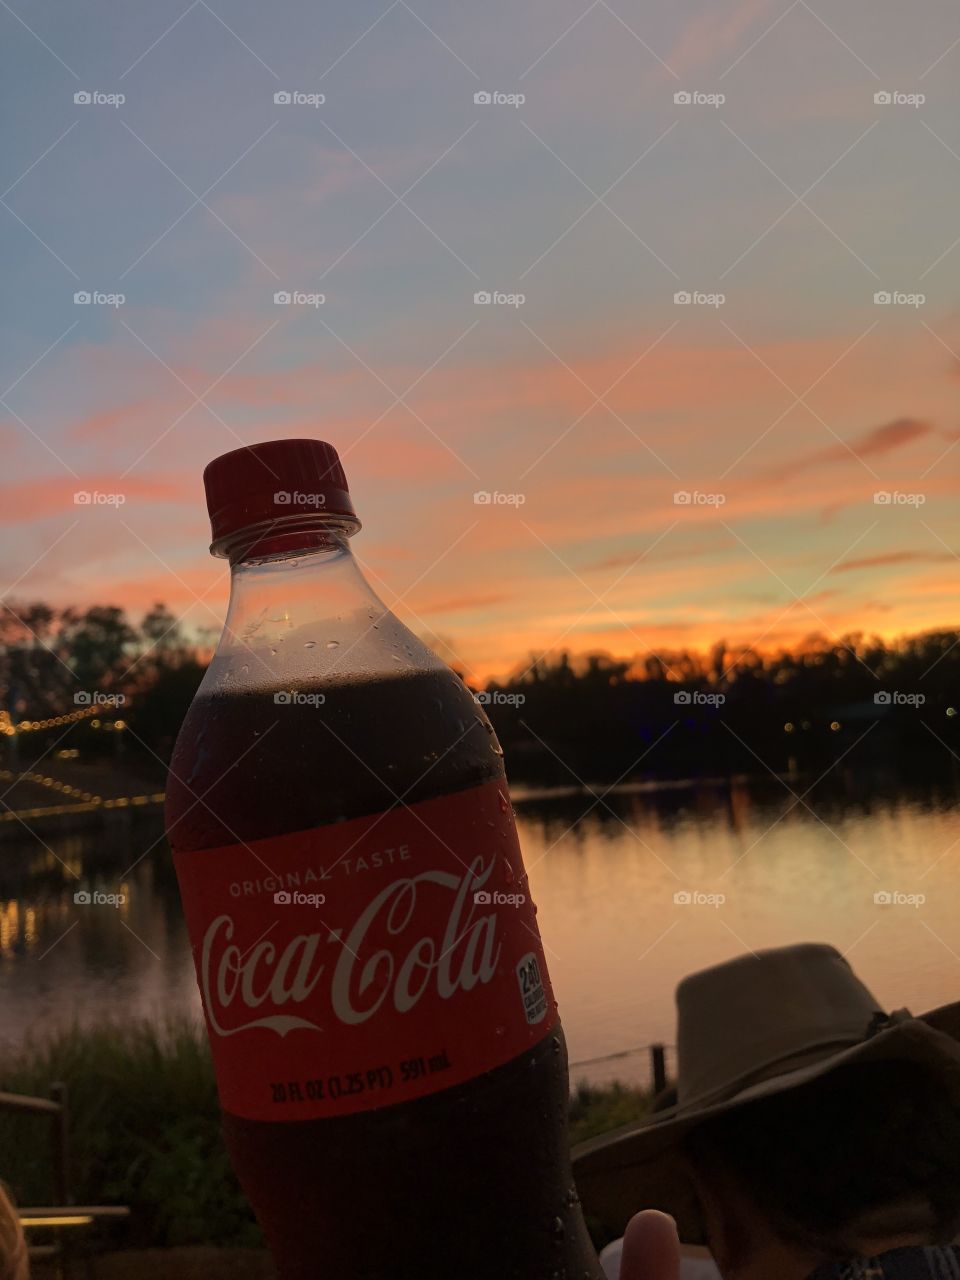 Enjoying my coca-cola while watching the sunset 